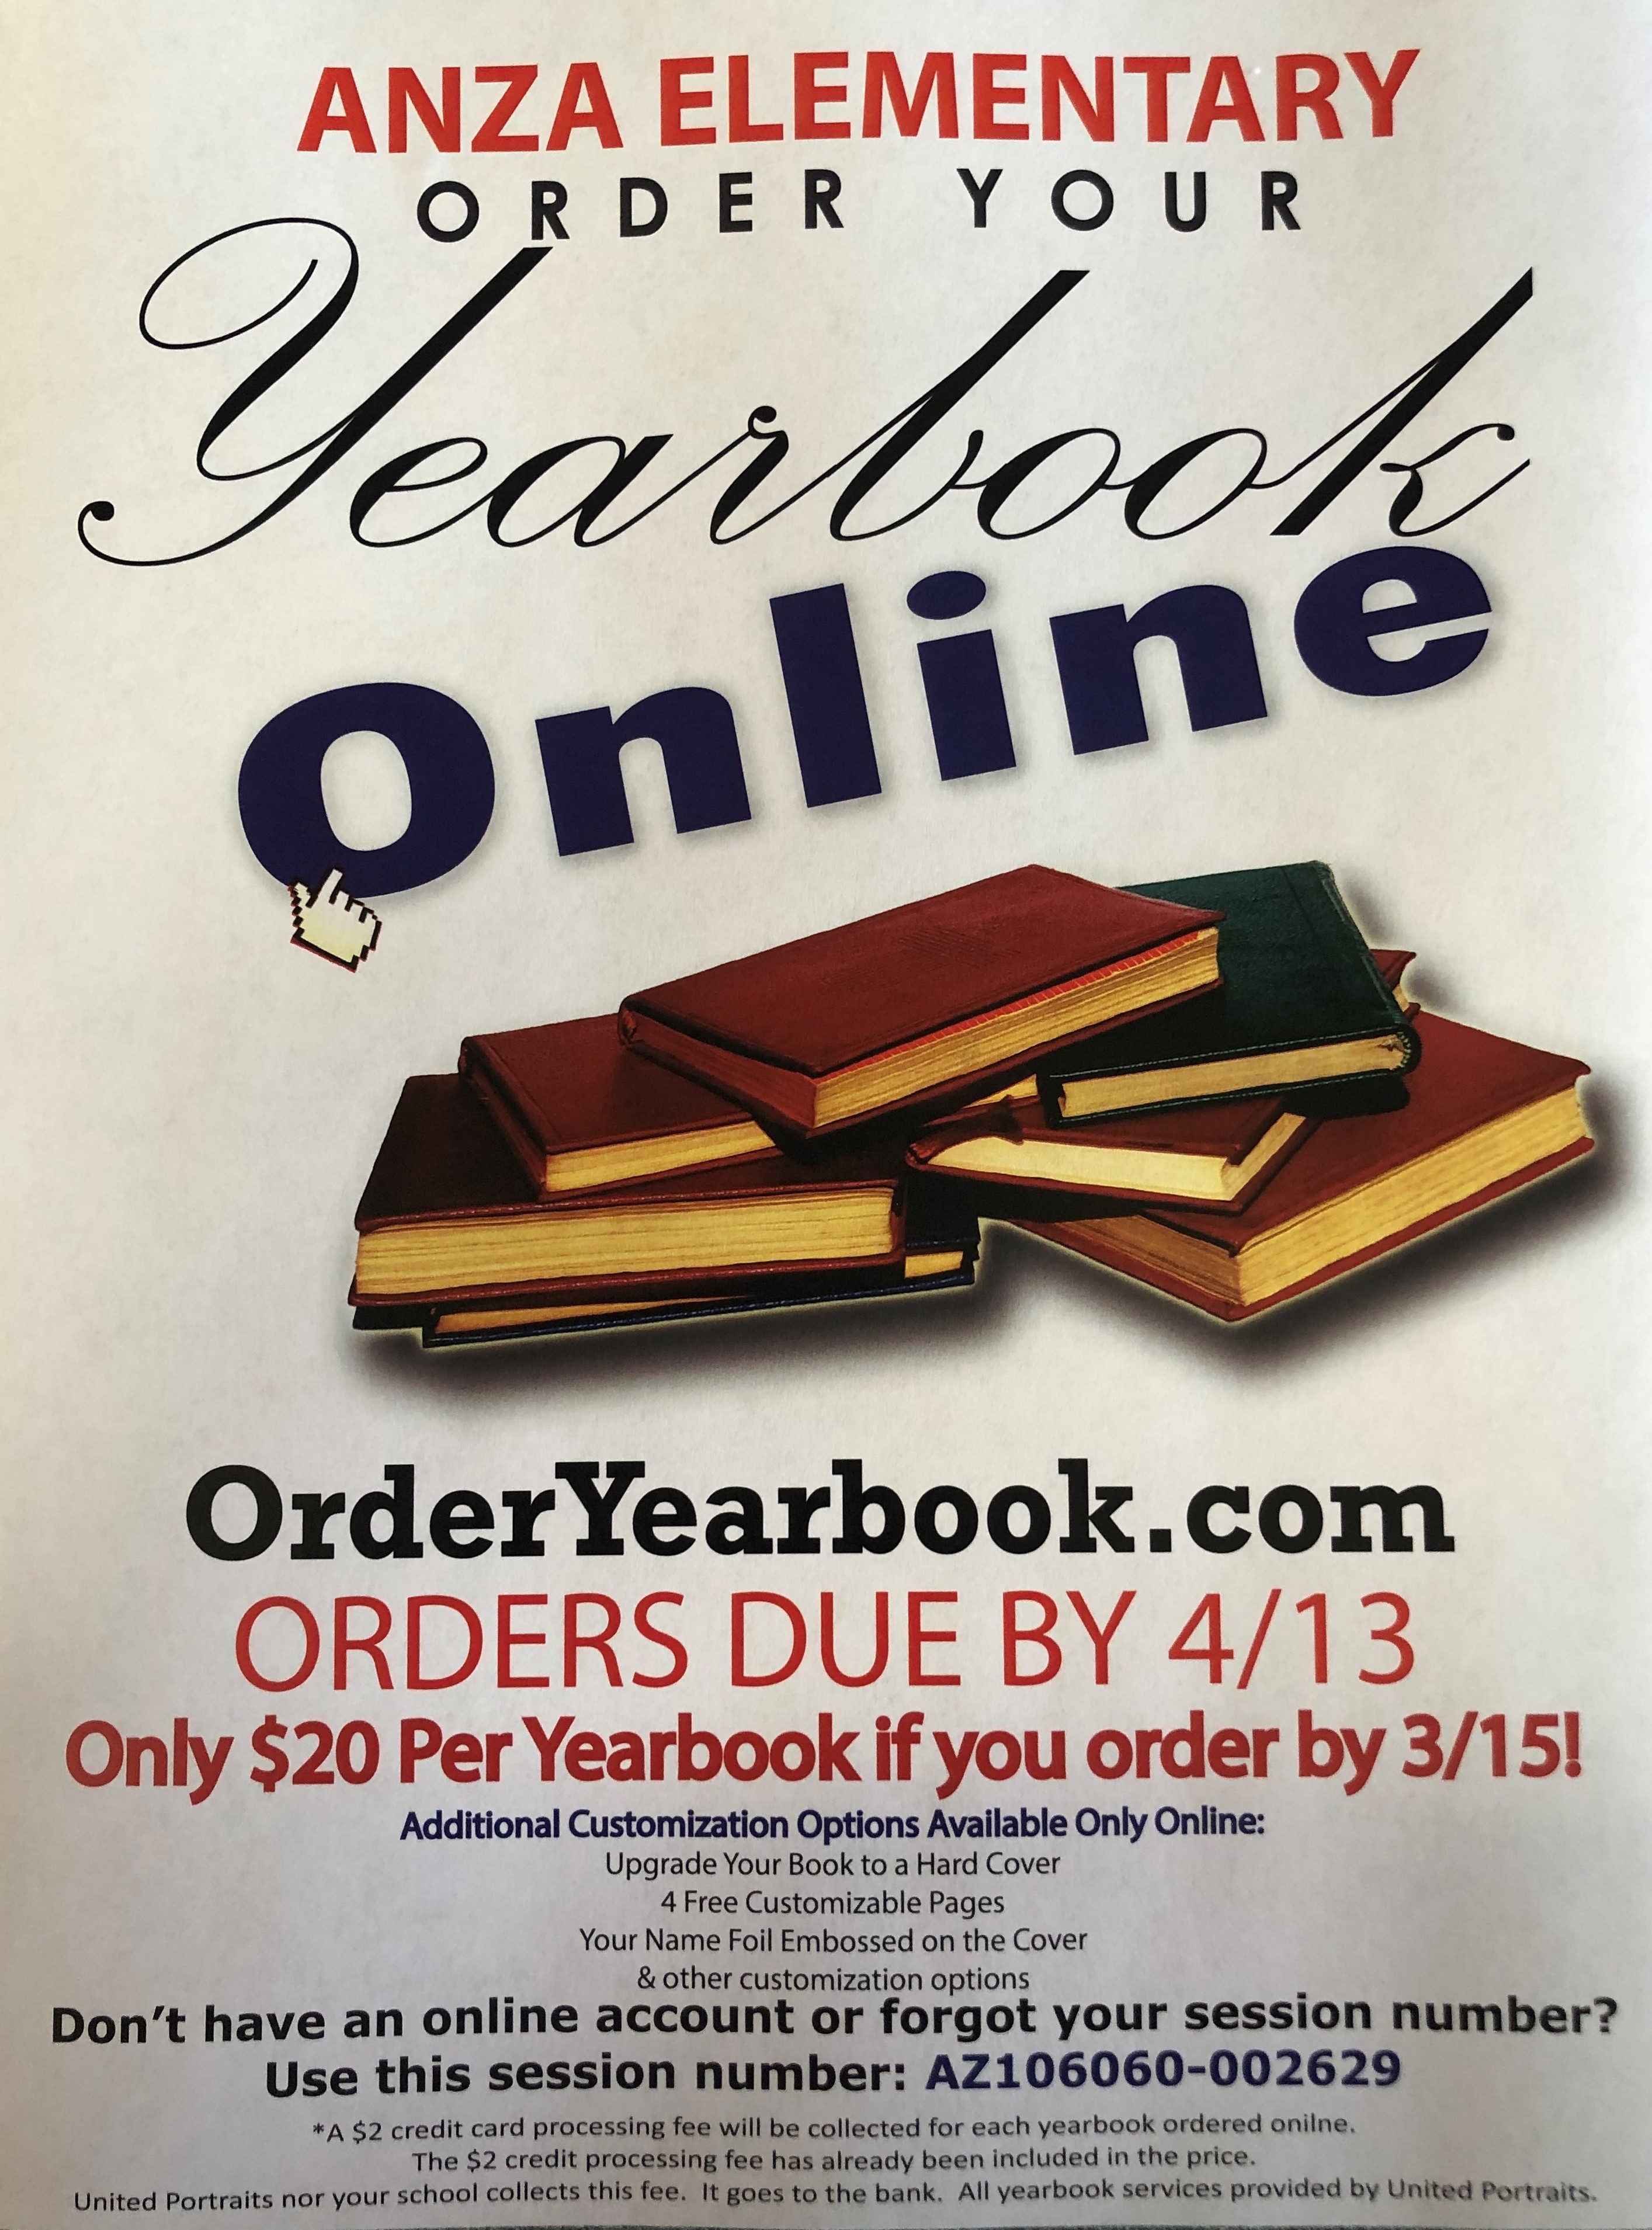 Time to order your yearbooks!! There will only be online orders accepted through orderyearbook.com. Session numbers are on the flyers.